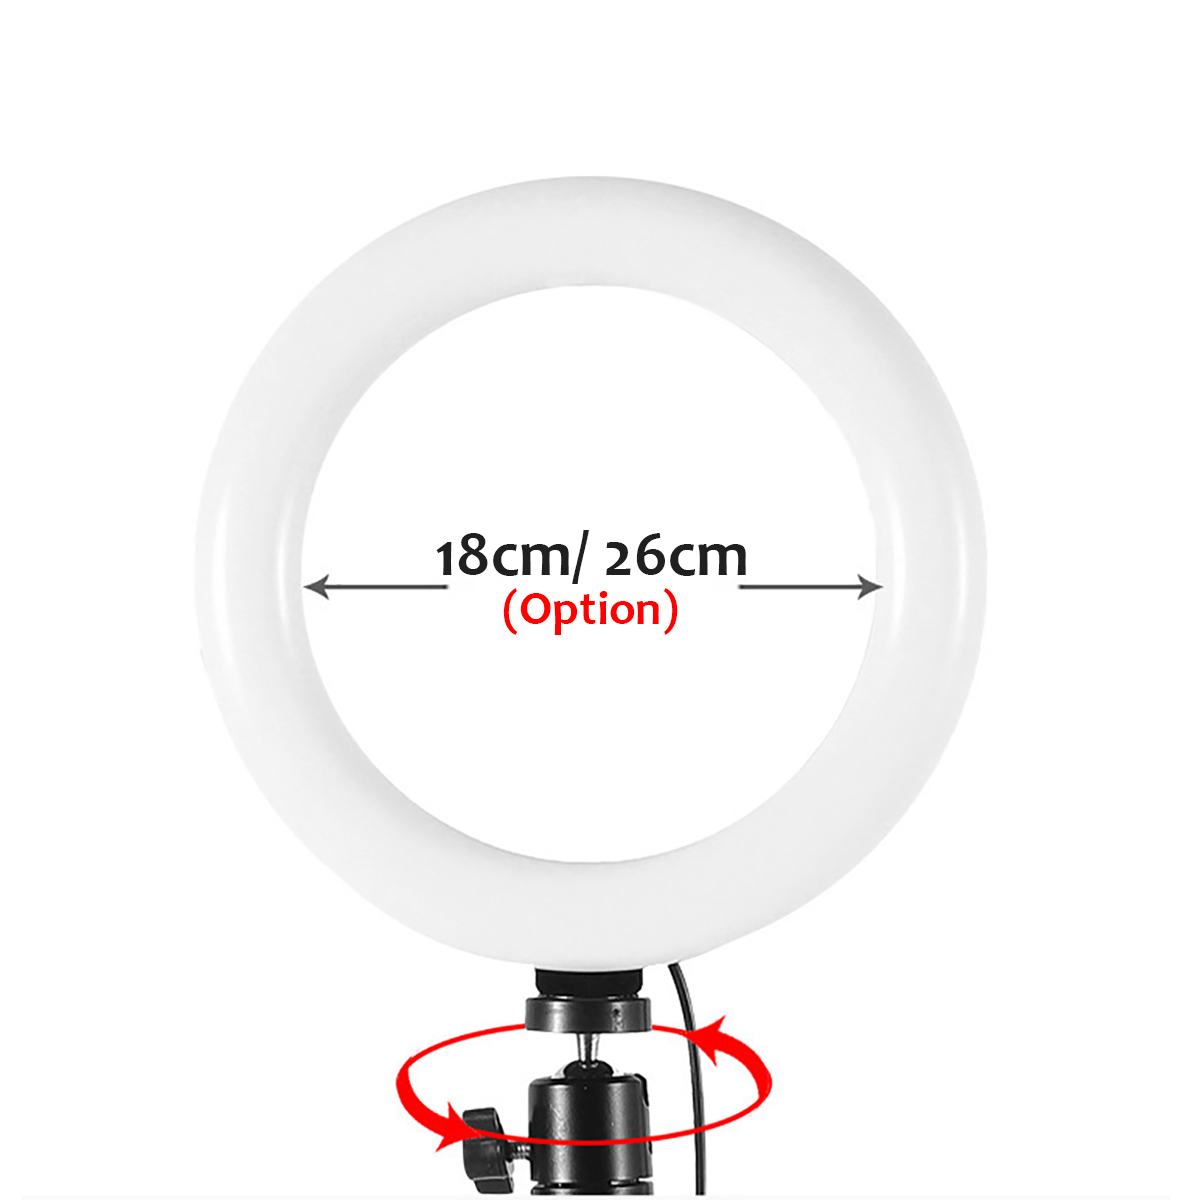 Dimmable-LED-Ring-Light-Lamp-18CM-26CM-Fill-Light-for-Makeup-Live-Stream-Selfie-Photography-Video-Re-1680025-7